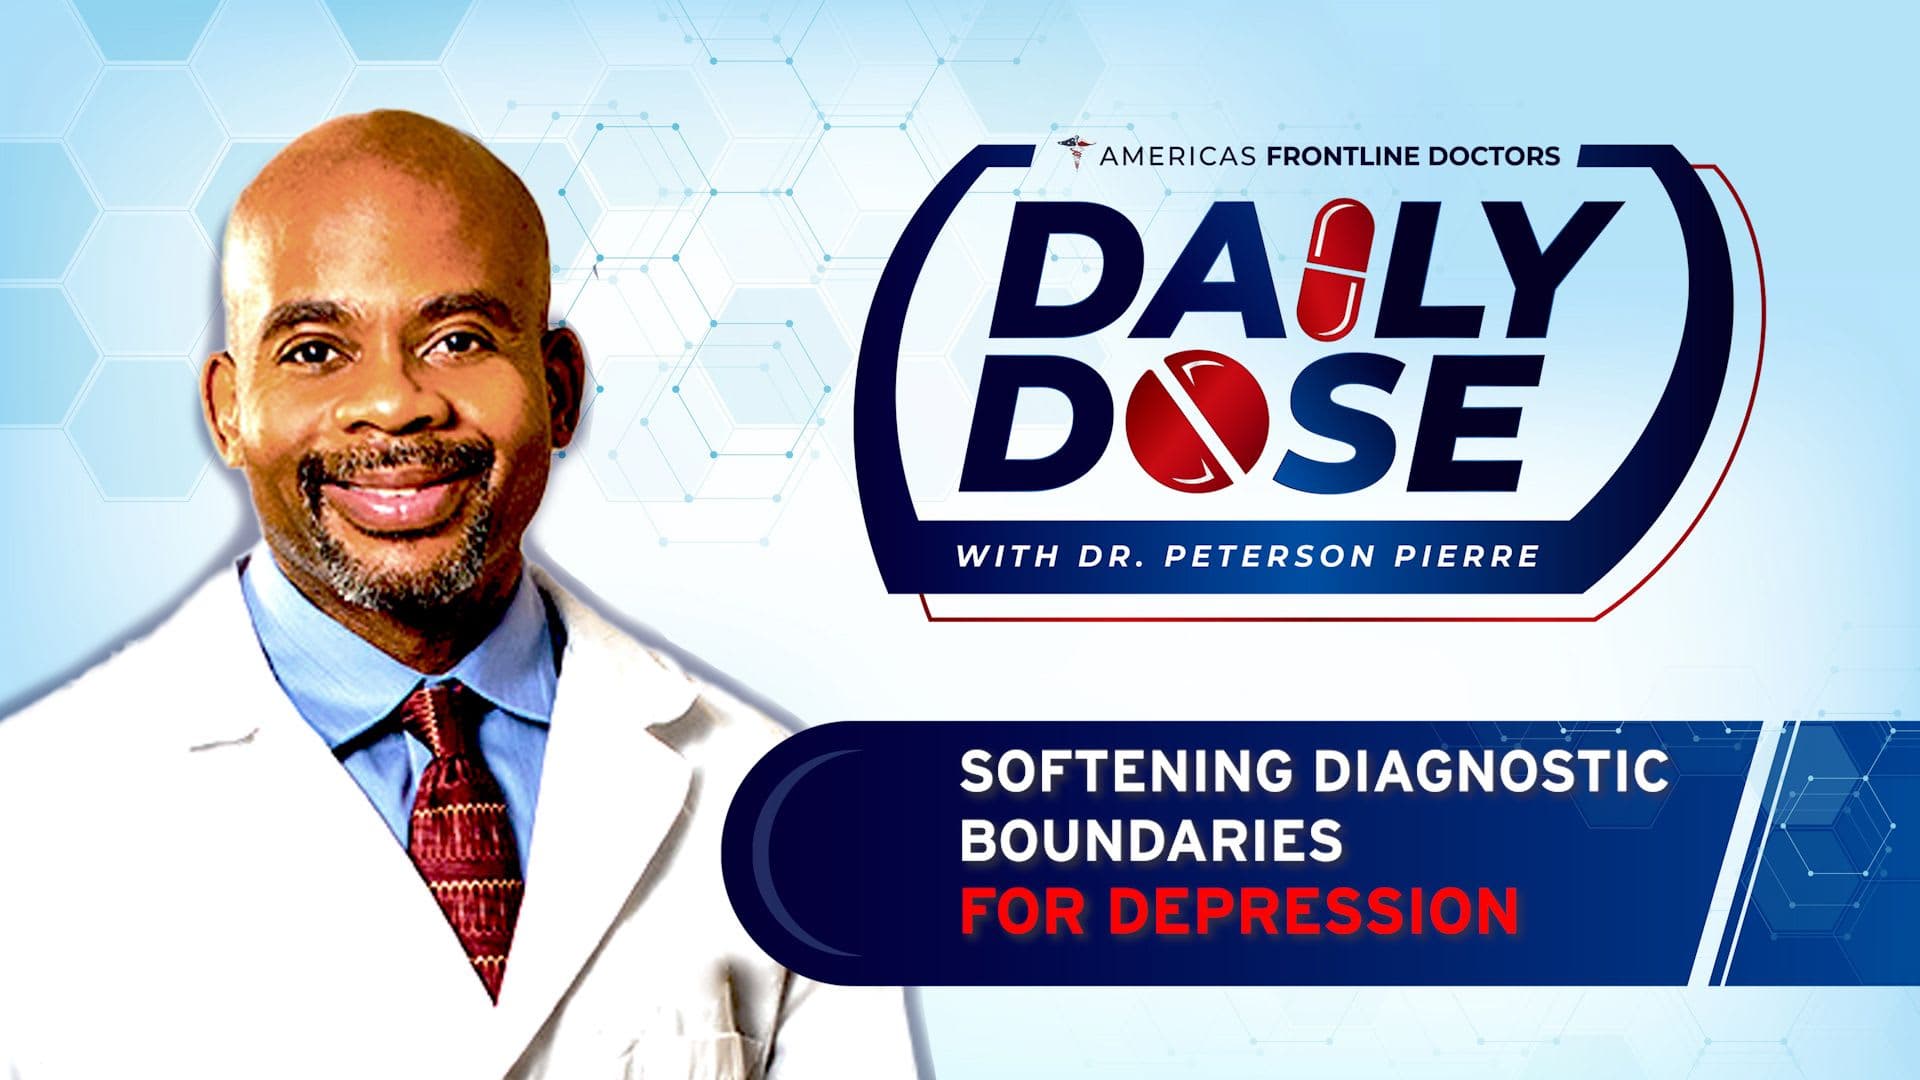 Daily Dose: 'Softening Diagnostic Boundaries for Depression' with Dr. Peterson Pierre